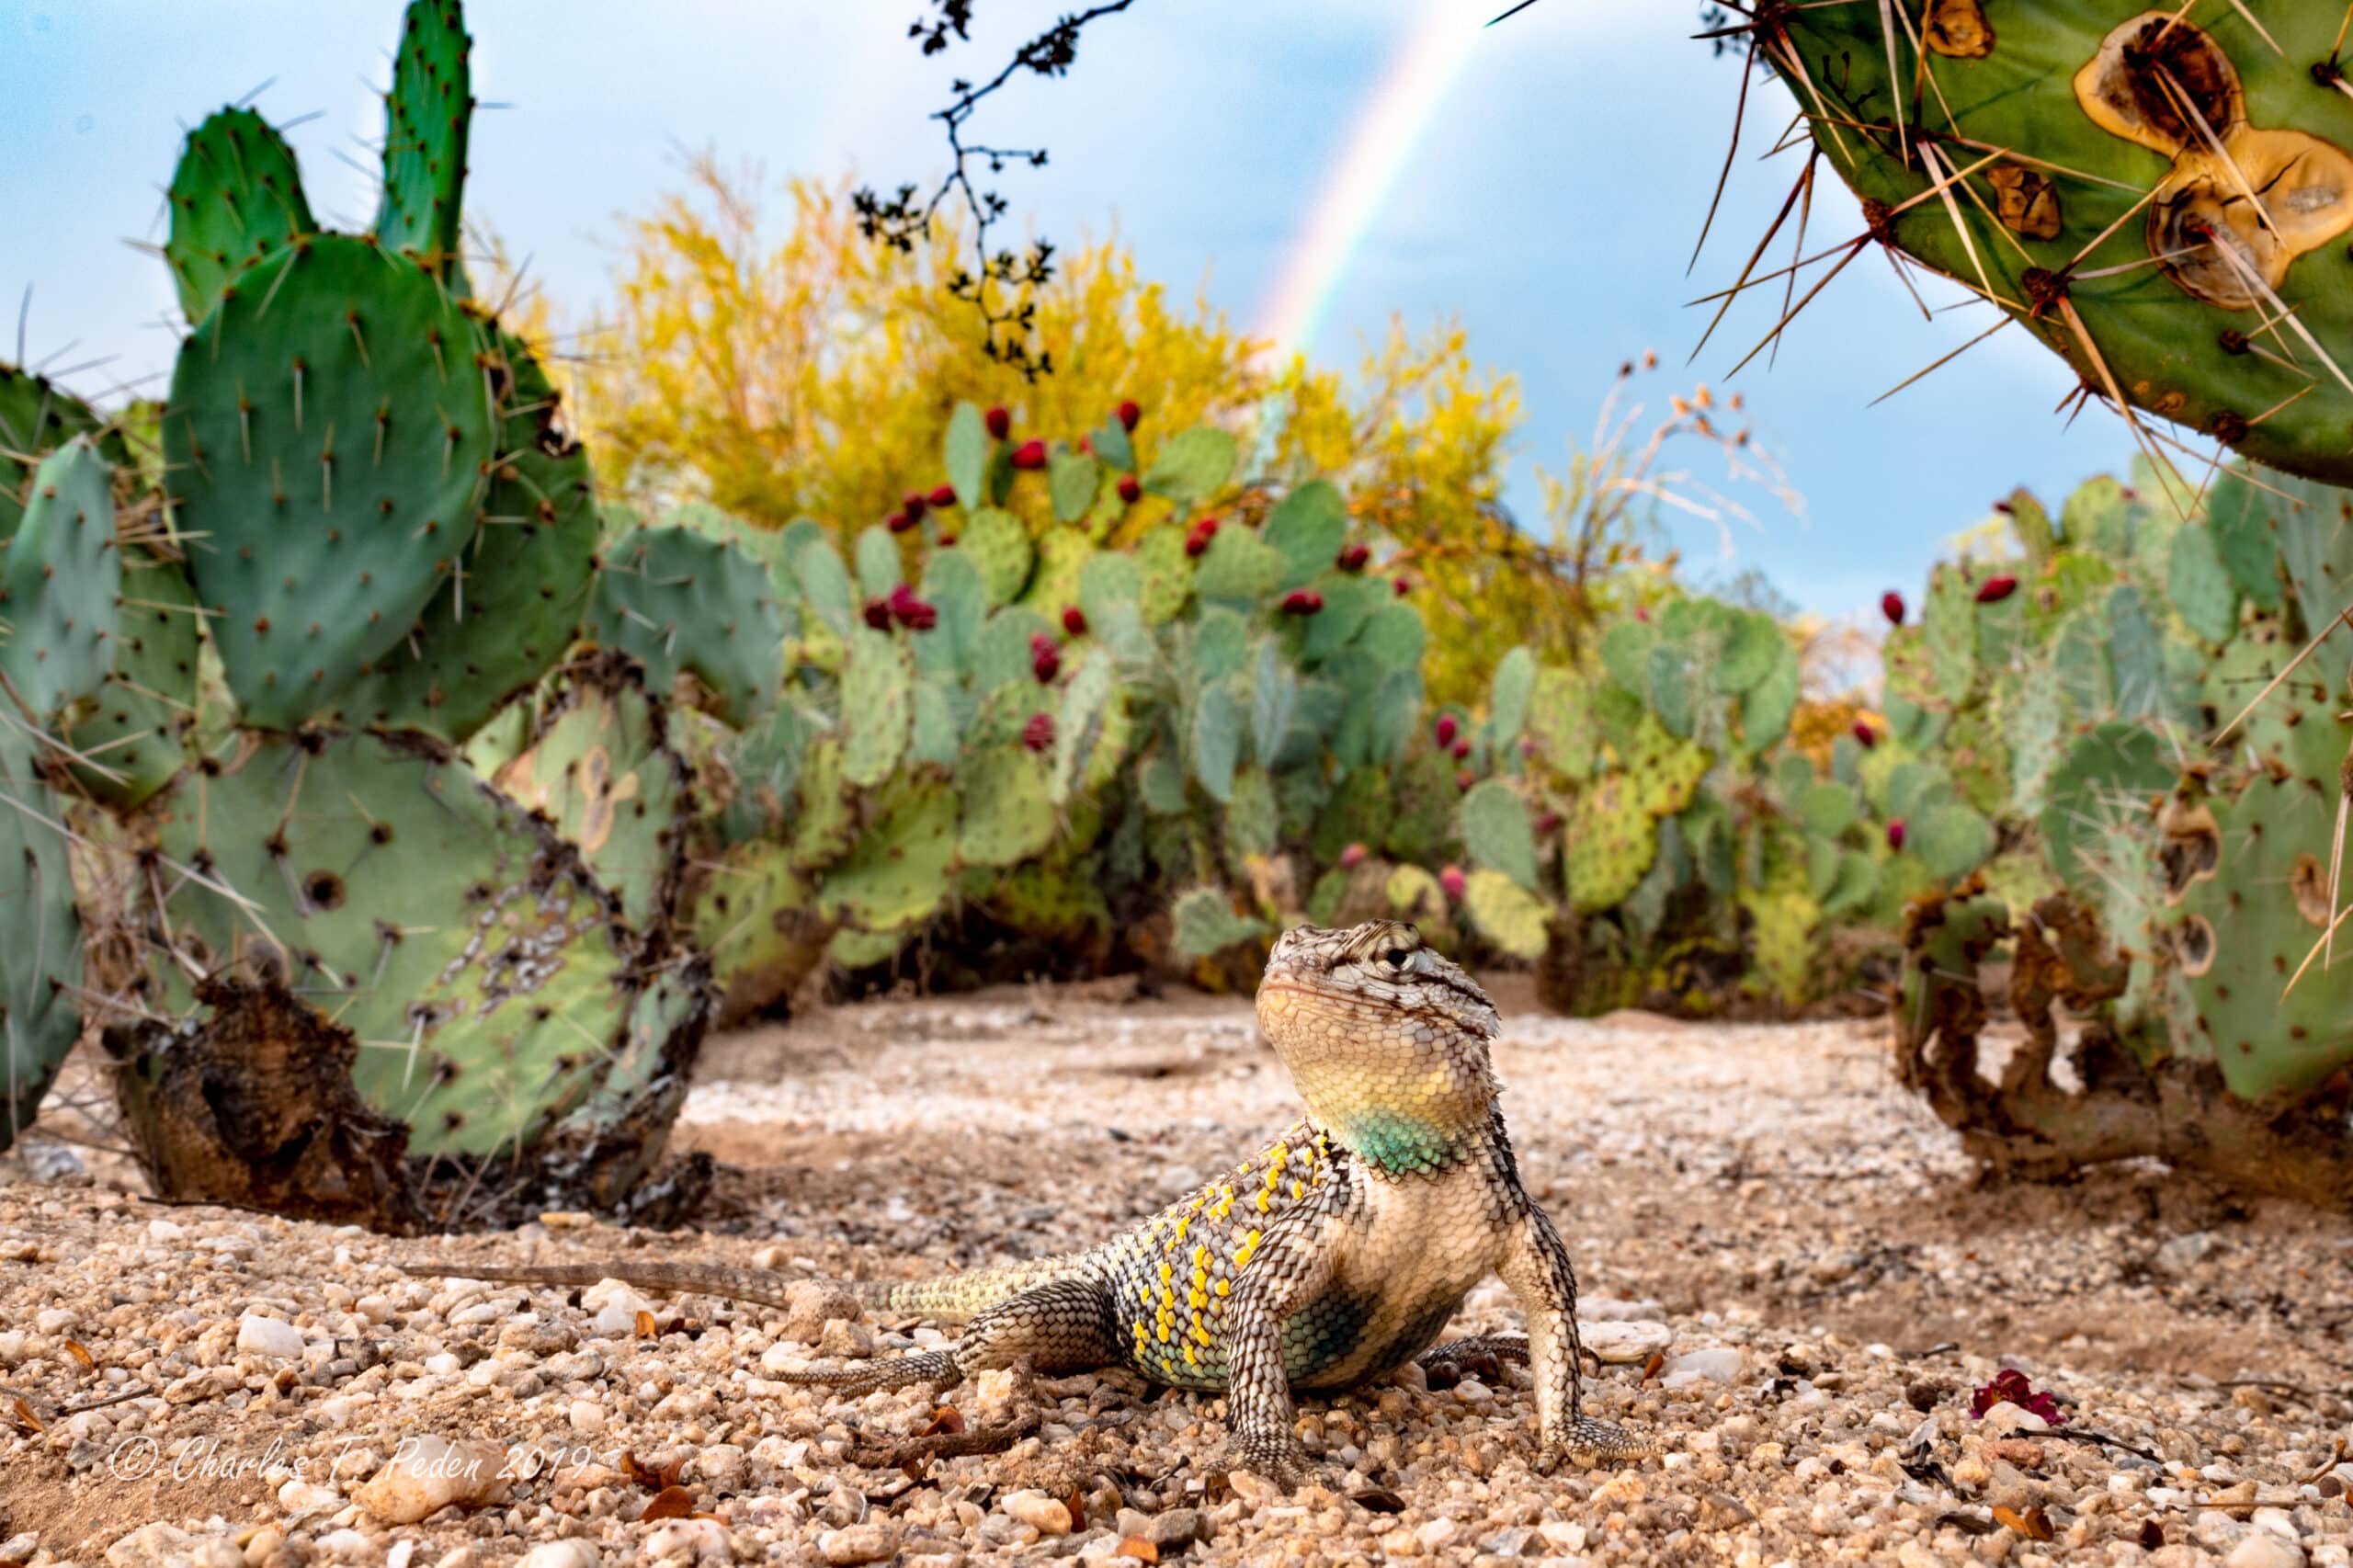 Male desert spiny lizard with prickly pear cactus and a rainbow overhead.